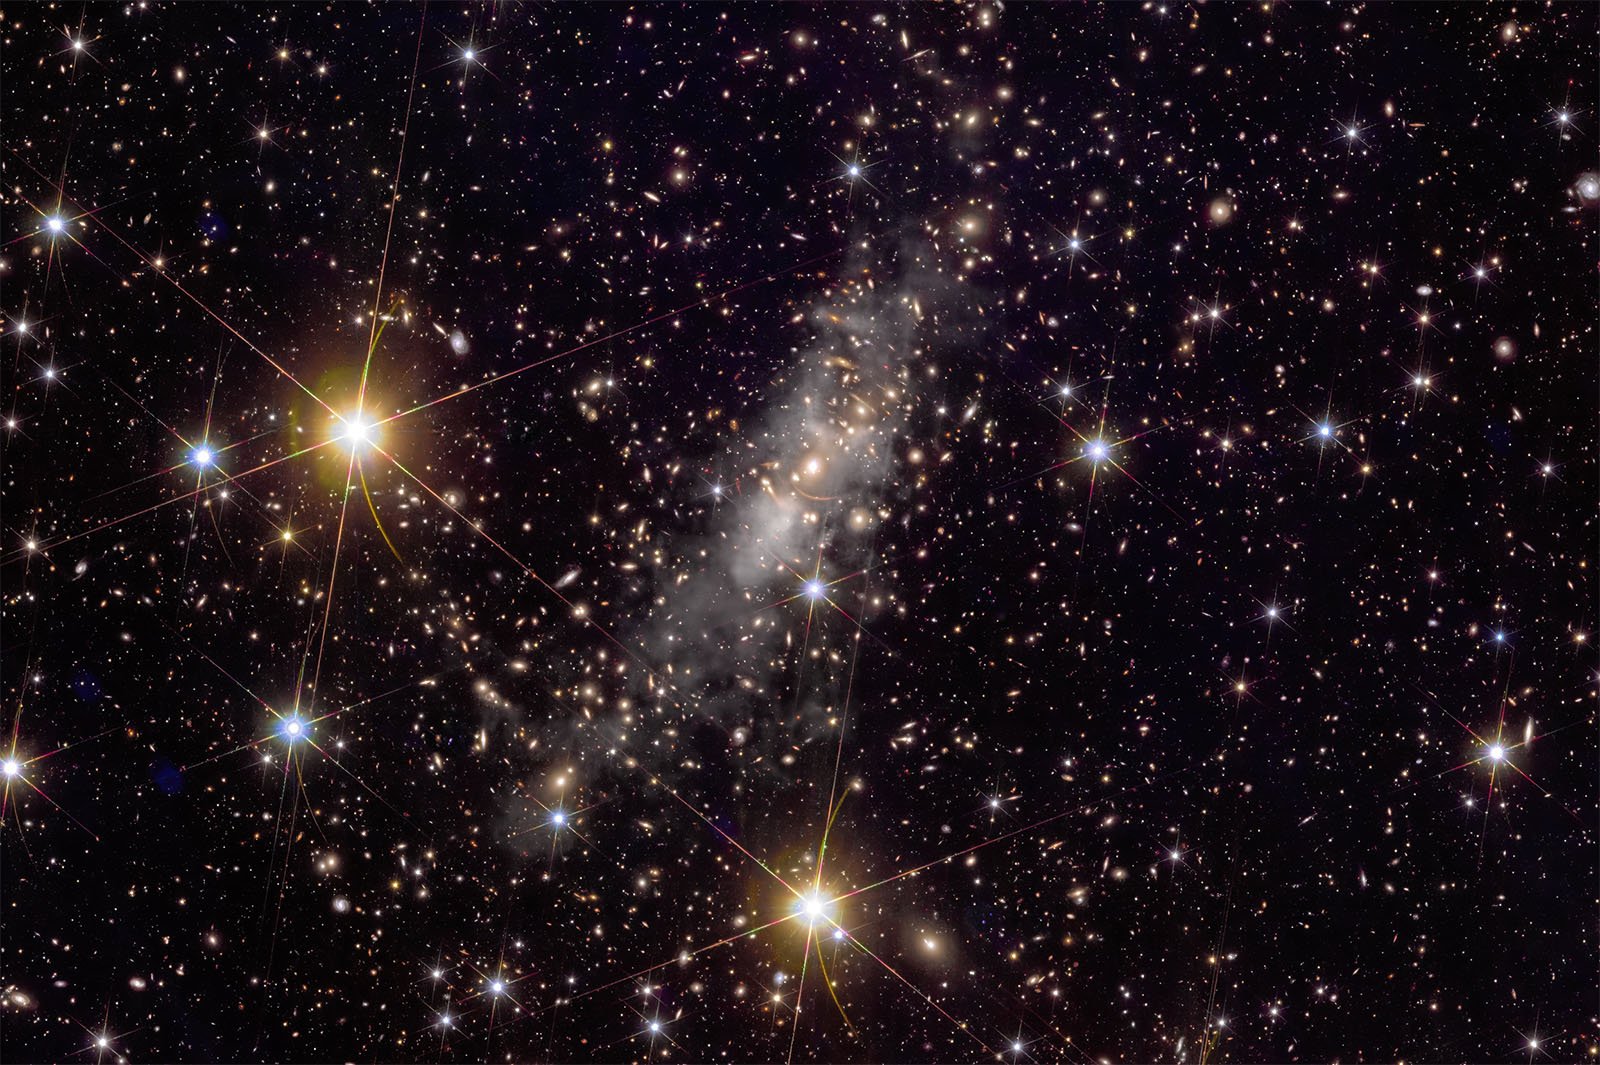 A dense field of stars fills the image, showcasing bright stars with diffraction spikes and many smaller stars scattered throughout. A hazy, elongated cloud of gas or dust stretches diagonally across the center, contrasting with the dark background of space.